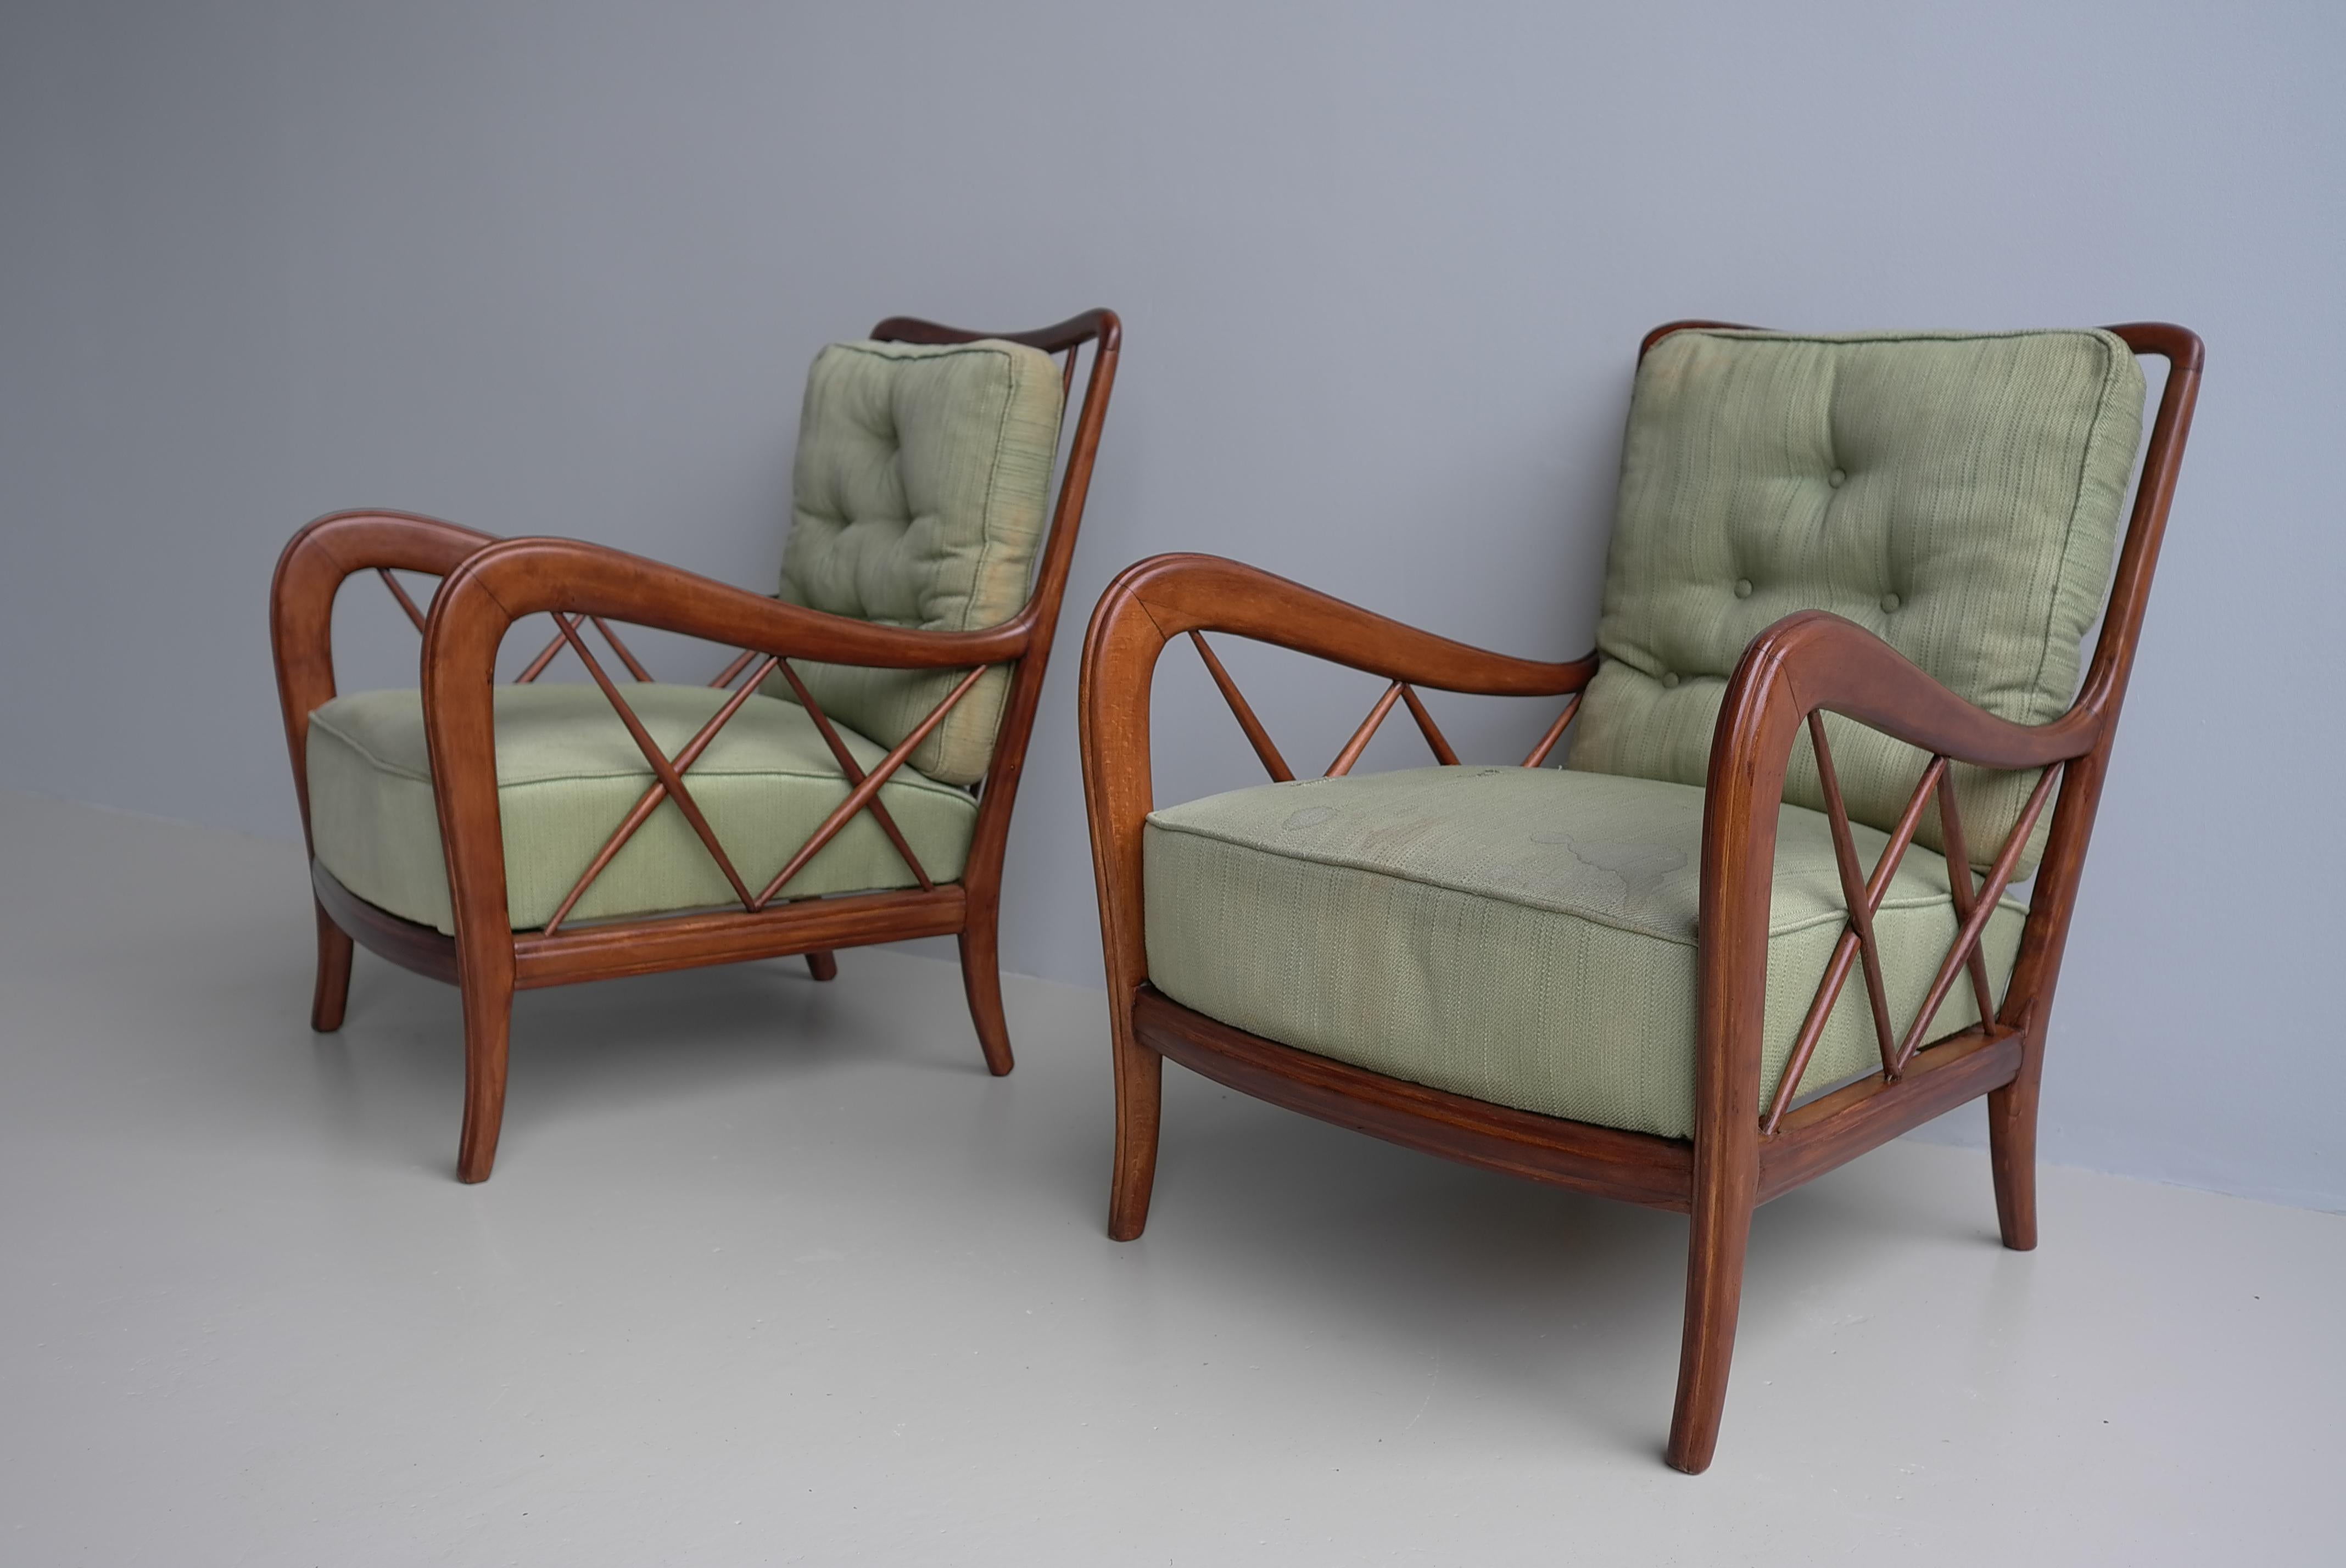 Walnut Wooden Lounge Chairs attr Paolo Buffa, Milan Italy 1940's For Sale 8